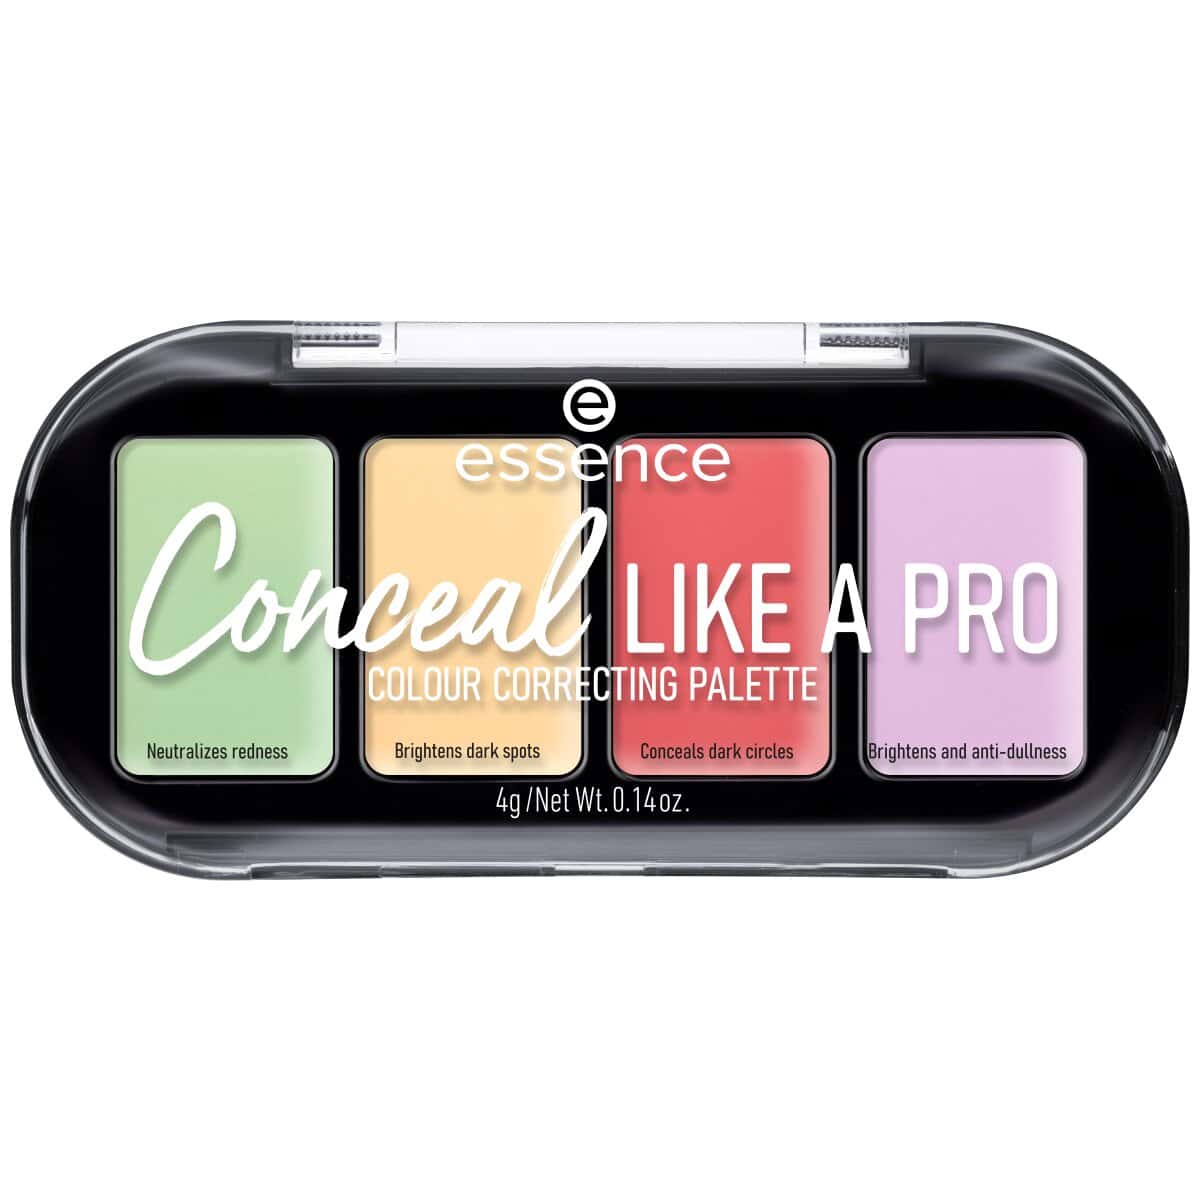 Essence Conceal Like A Pro Colour Correcting Palette